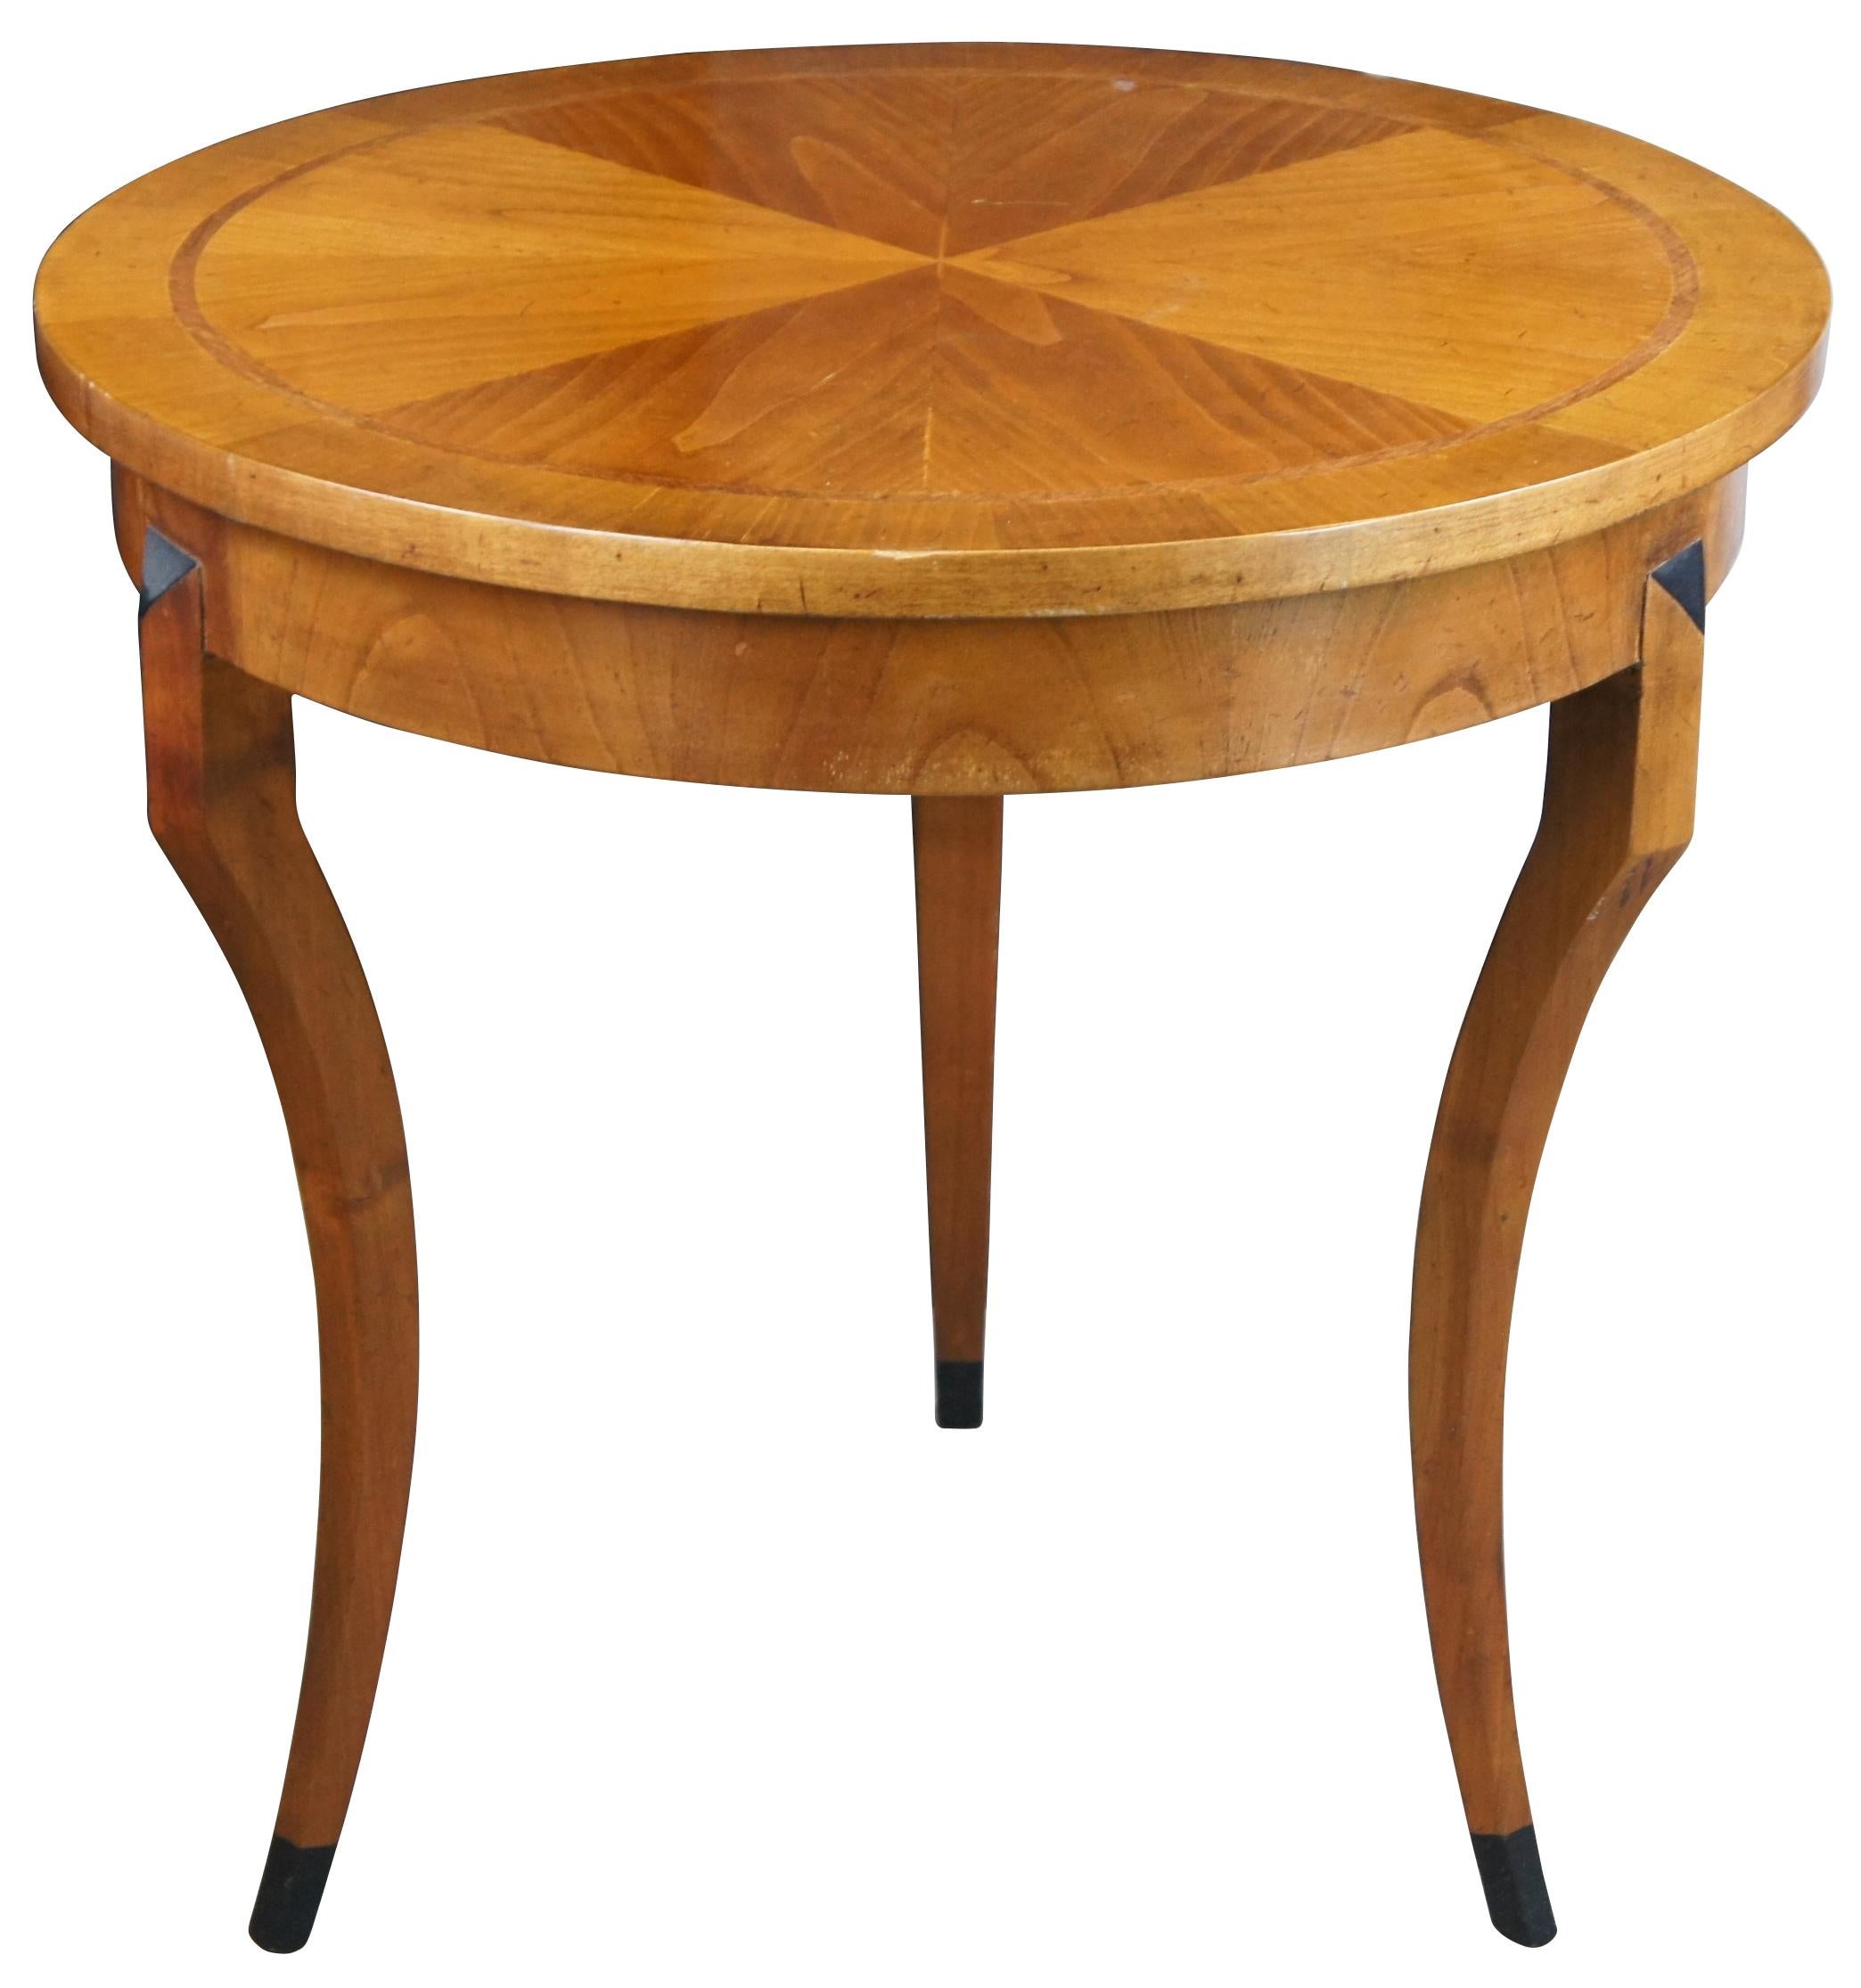 Italian crafted Gueridon table in Biedermeier form, circa last quarter 20th century. Features a round top made from Cherry with matchbook veneer and banding over three saber legs with ebonized trim. Naturally distressed finish. Marked along